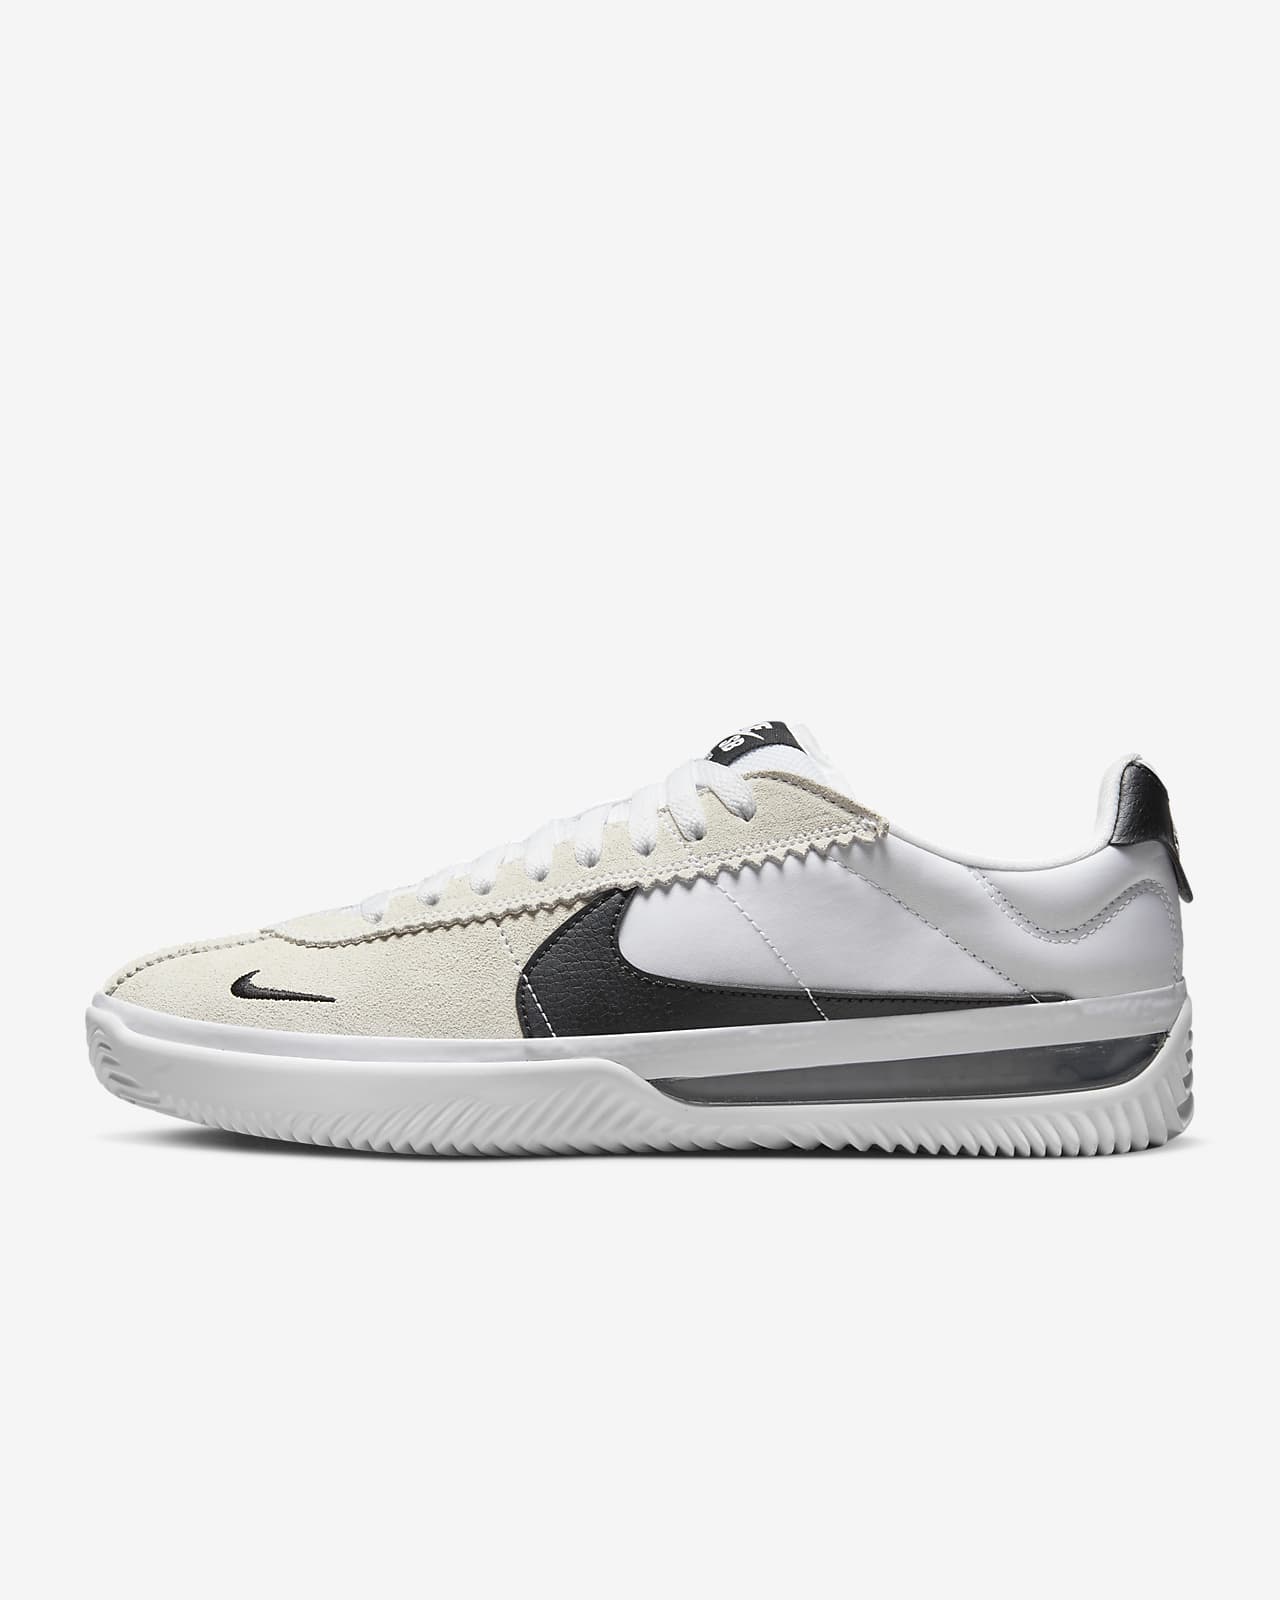 Buy Nike Shoes & New Sneakers - StockX-saigonsouth.com.vn